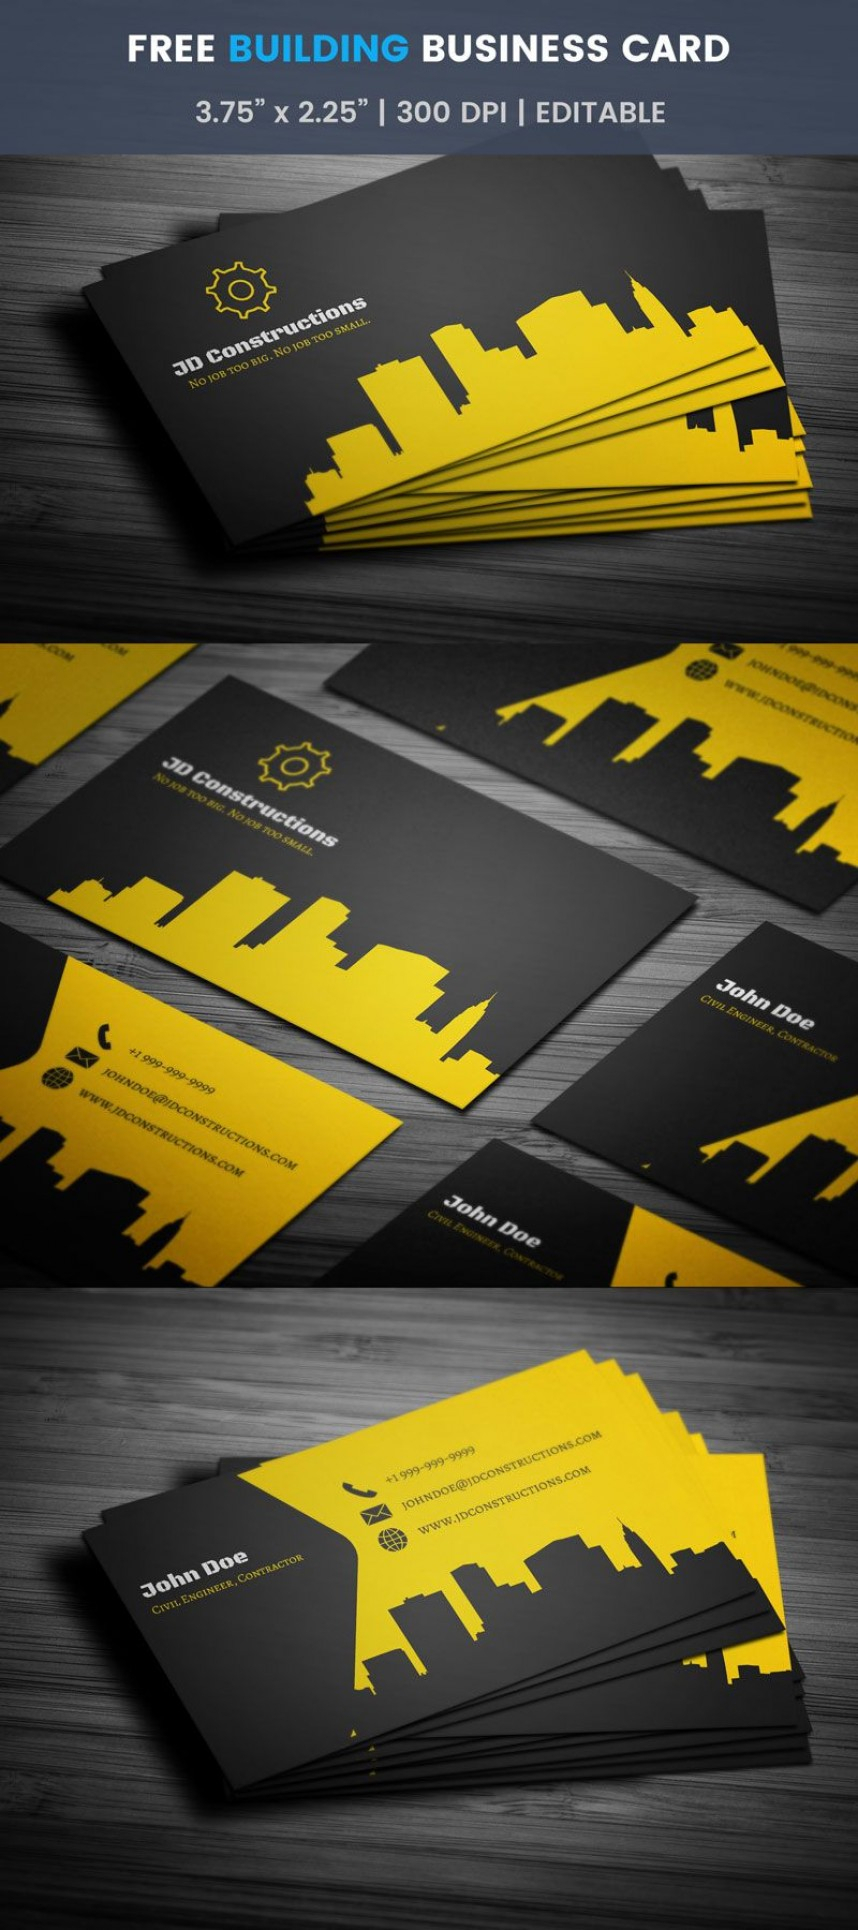 021 Trancprnt Business Card Template Ideas Construction With Regard To Construction Business Card Templates Download Free